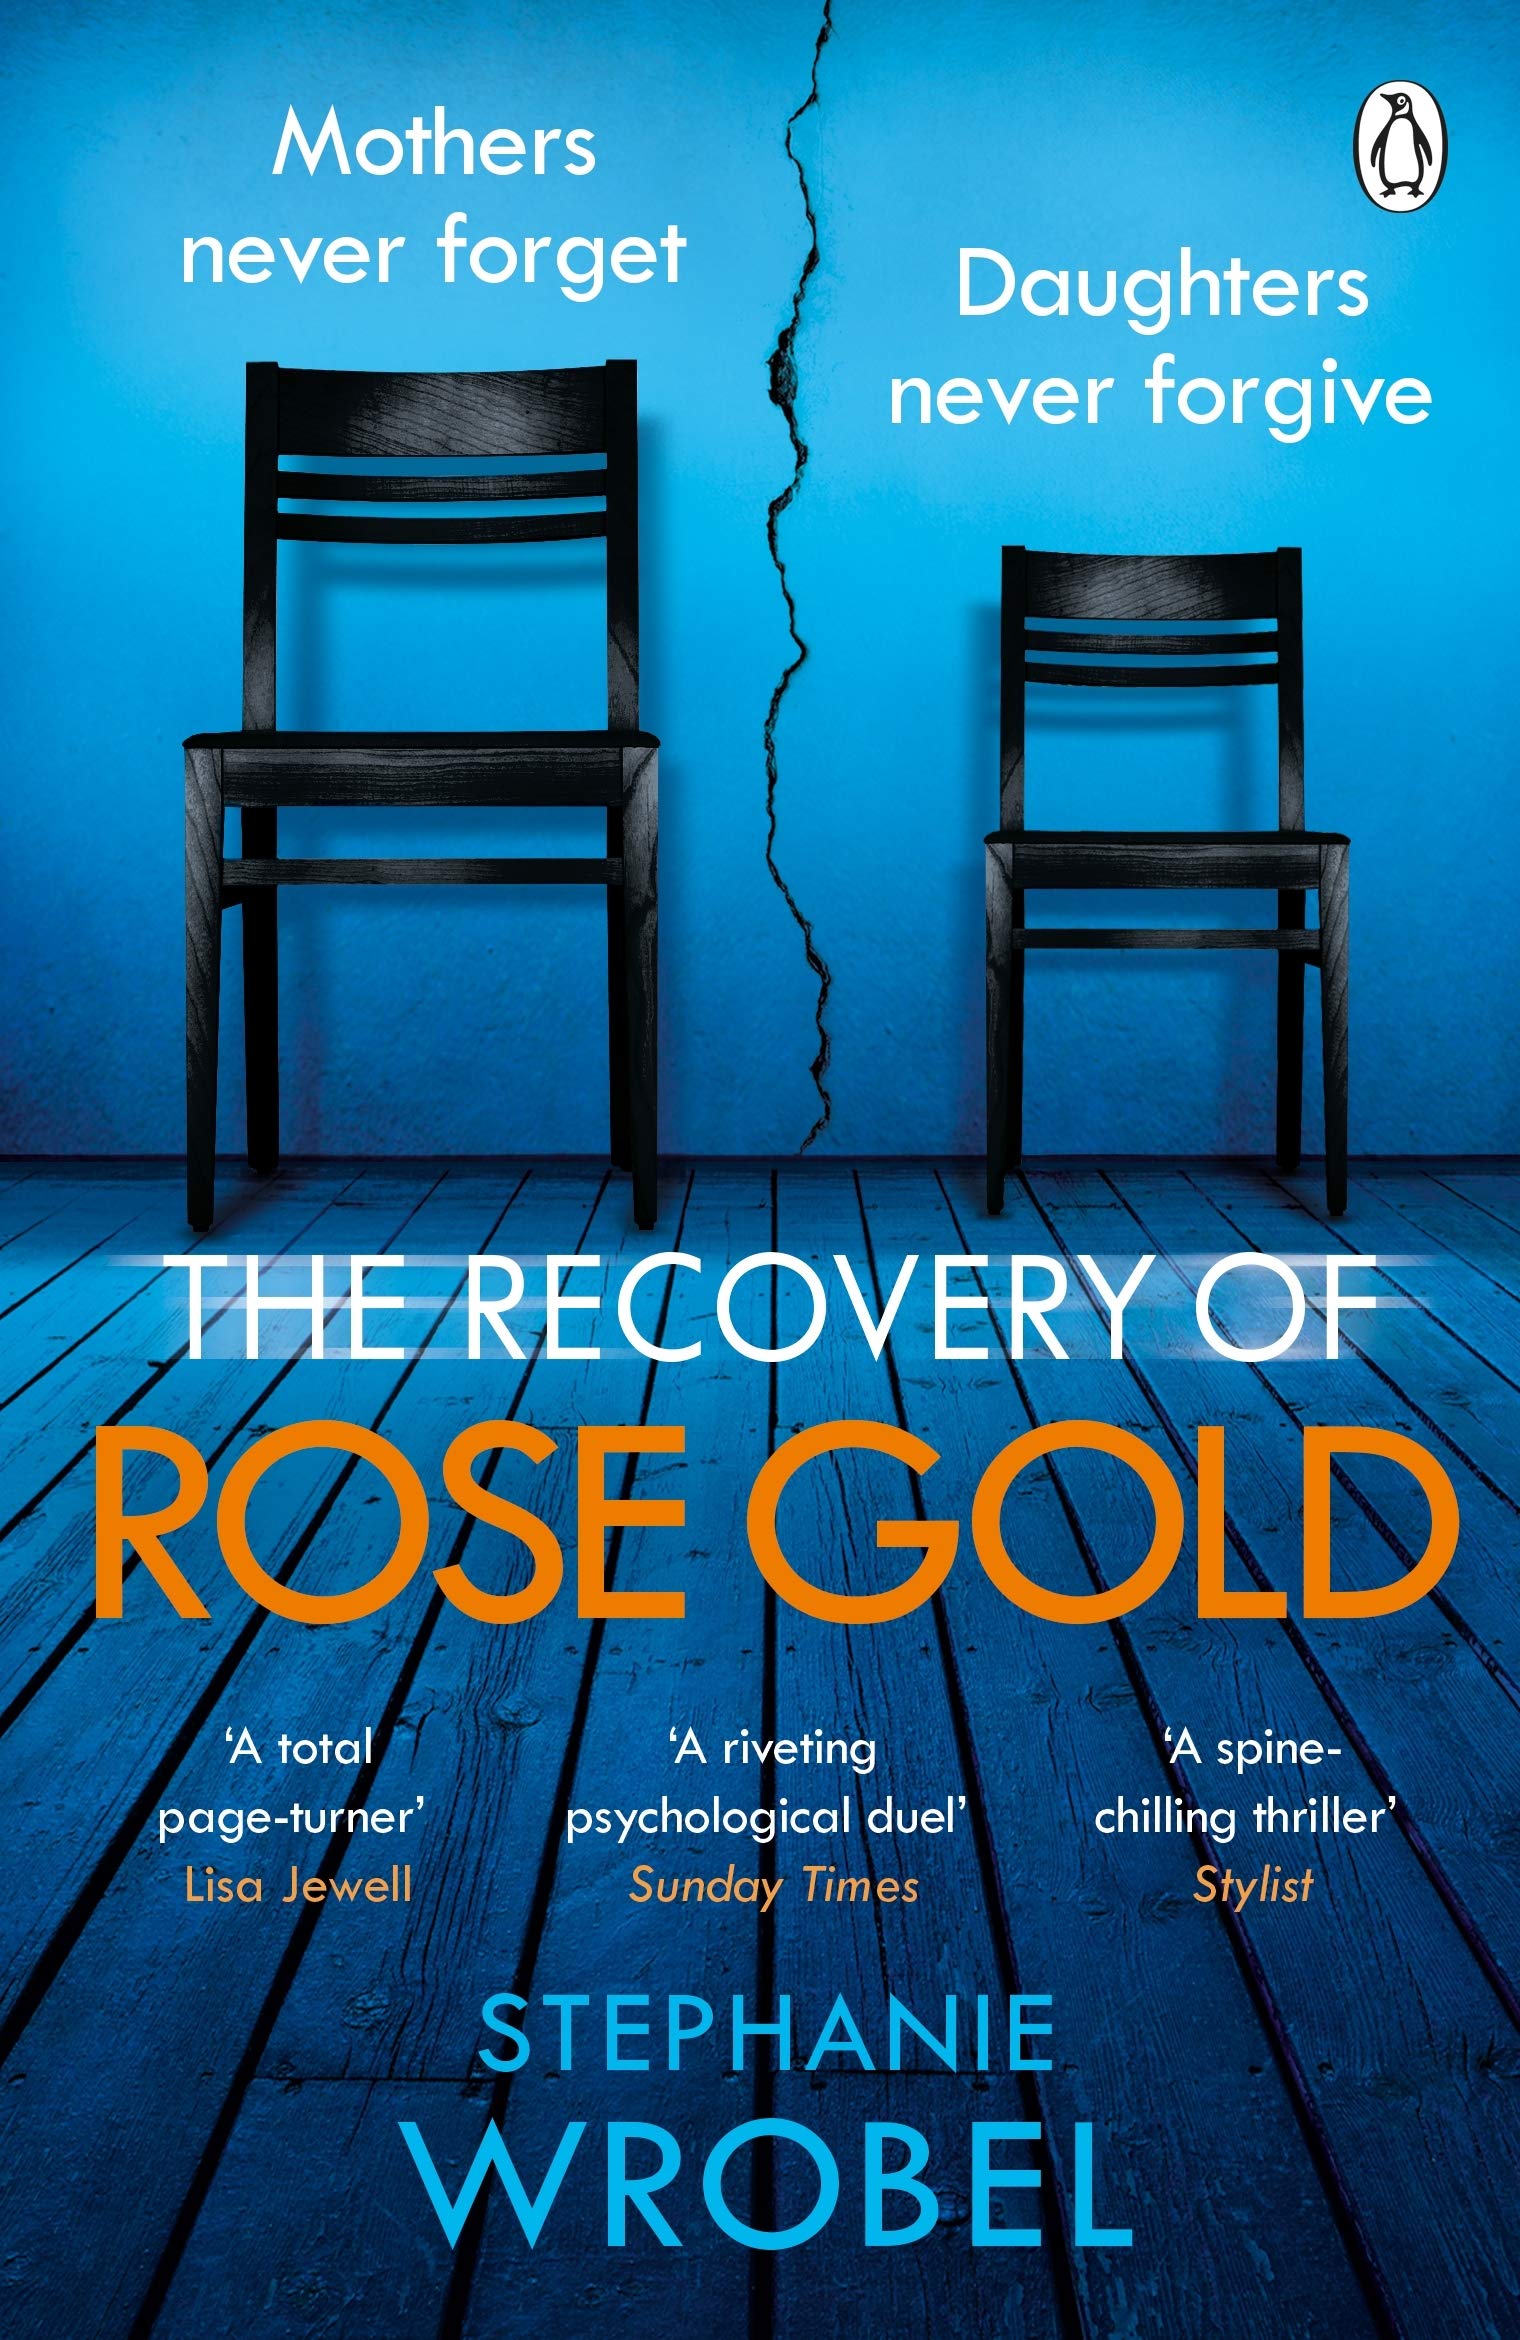 The Recovery of Rose Gold | Stephanie Wrobel